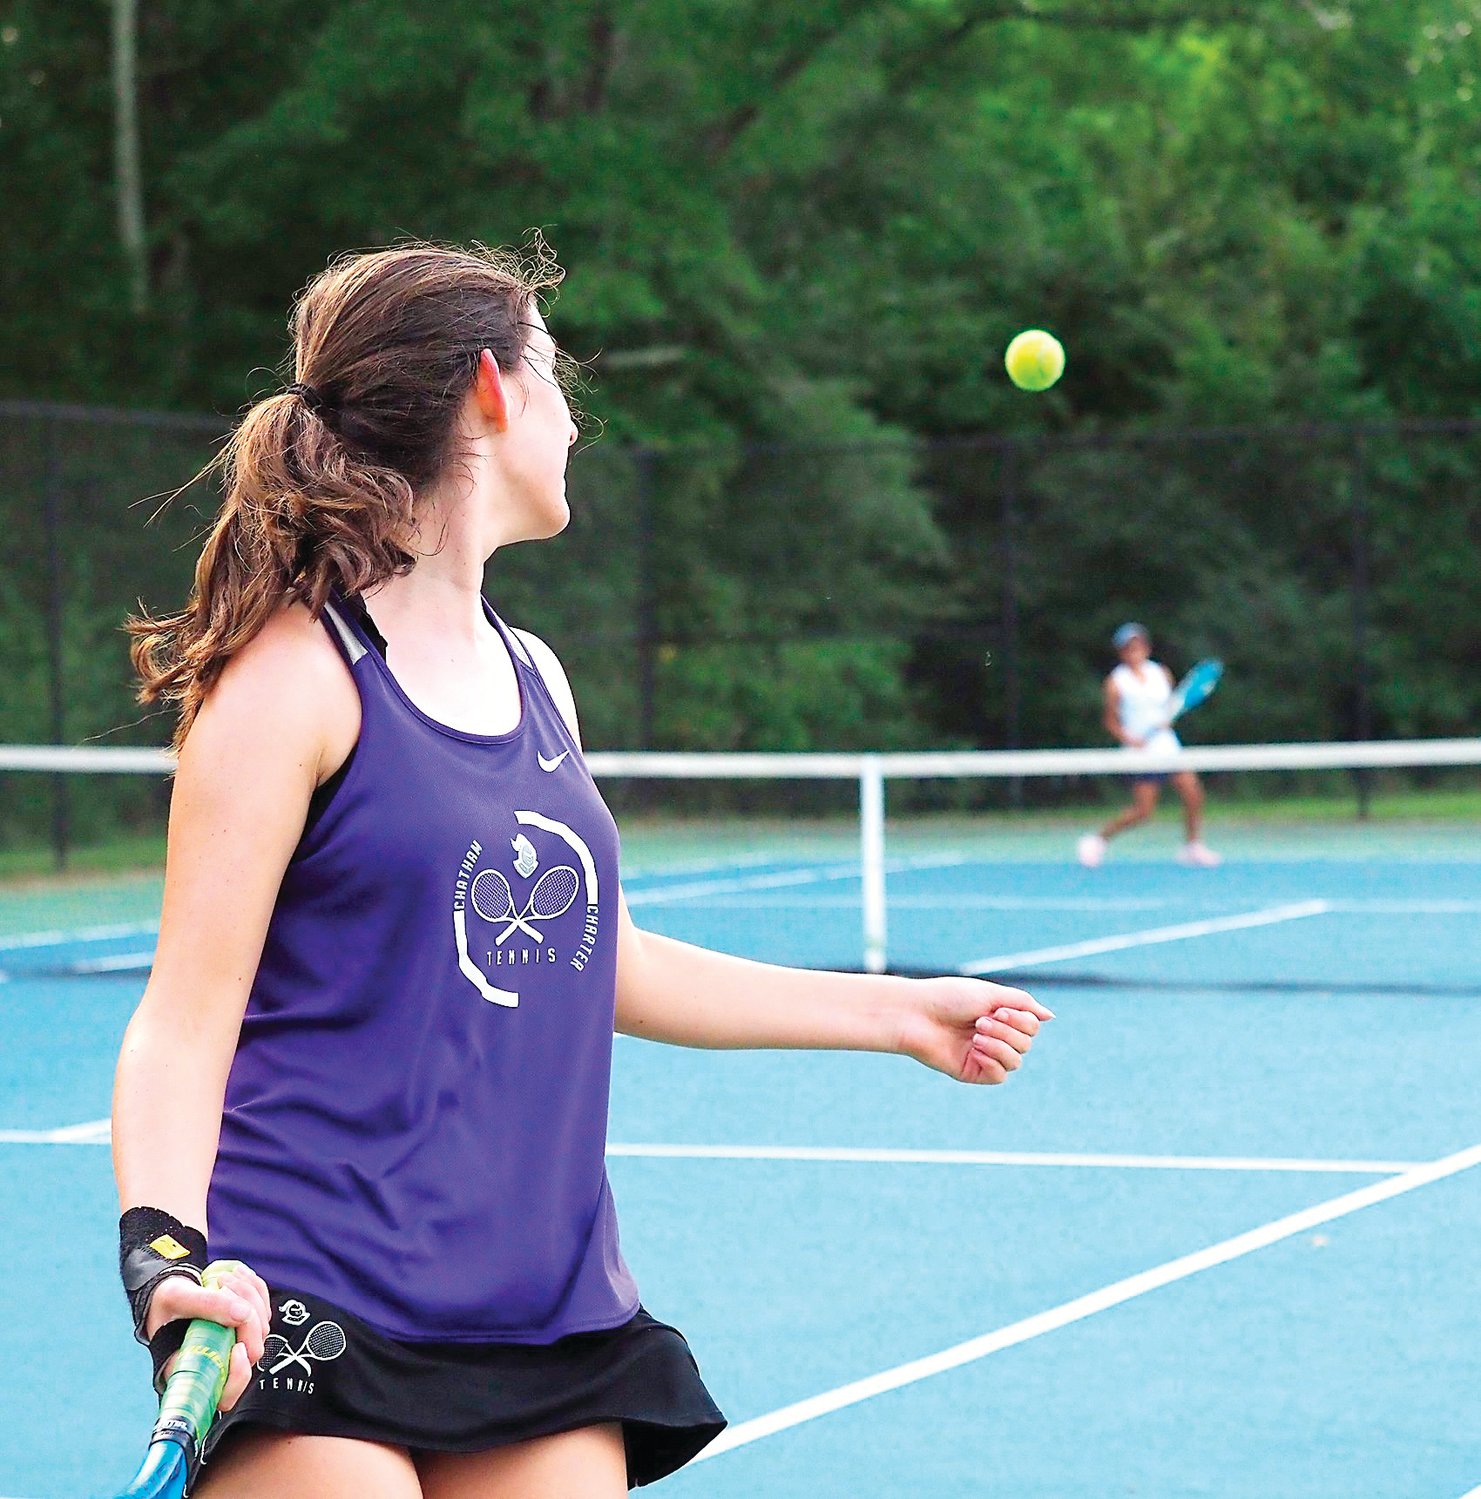 Chatham Charter sophomore Elphie Spillman looks to hit a shot in her singles match against Research Triangle sophomore Olivia Hankinson on Aug. 31. Spillman, who's 1-4 on the season, lost the match, 8-0.